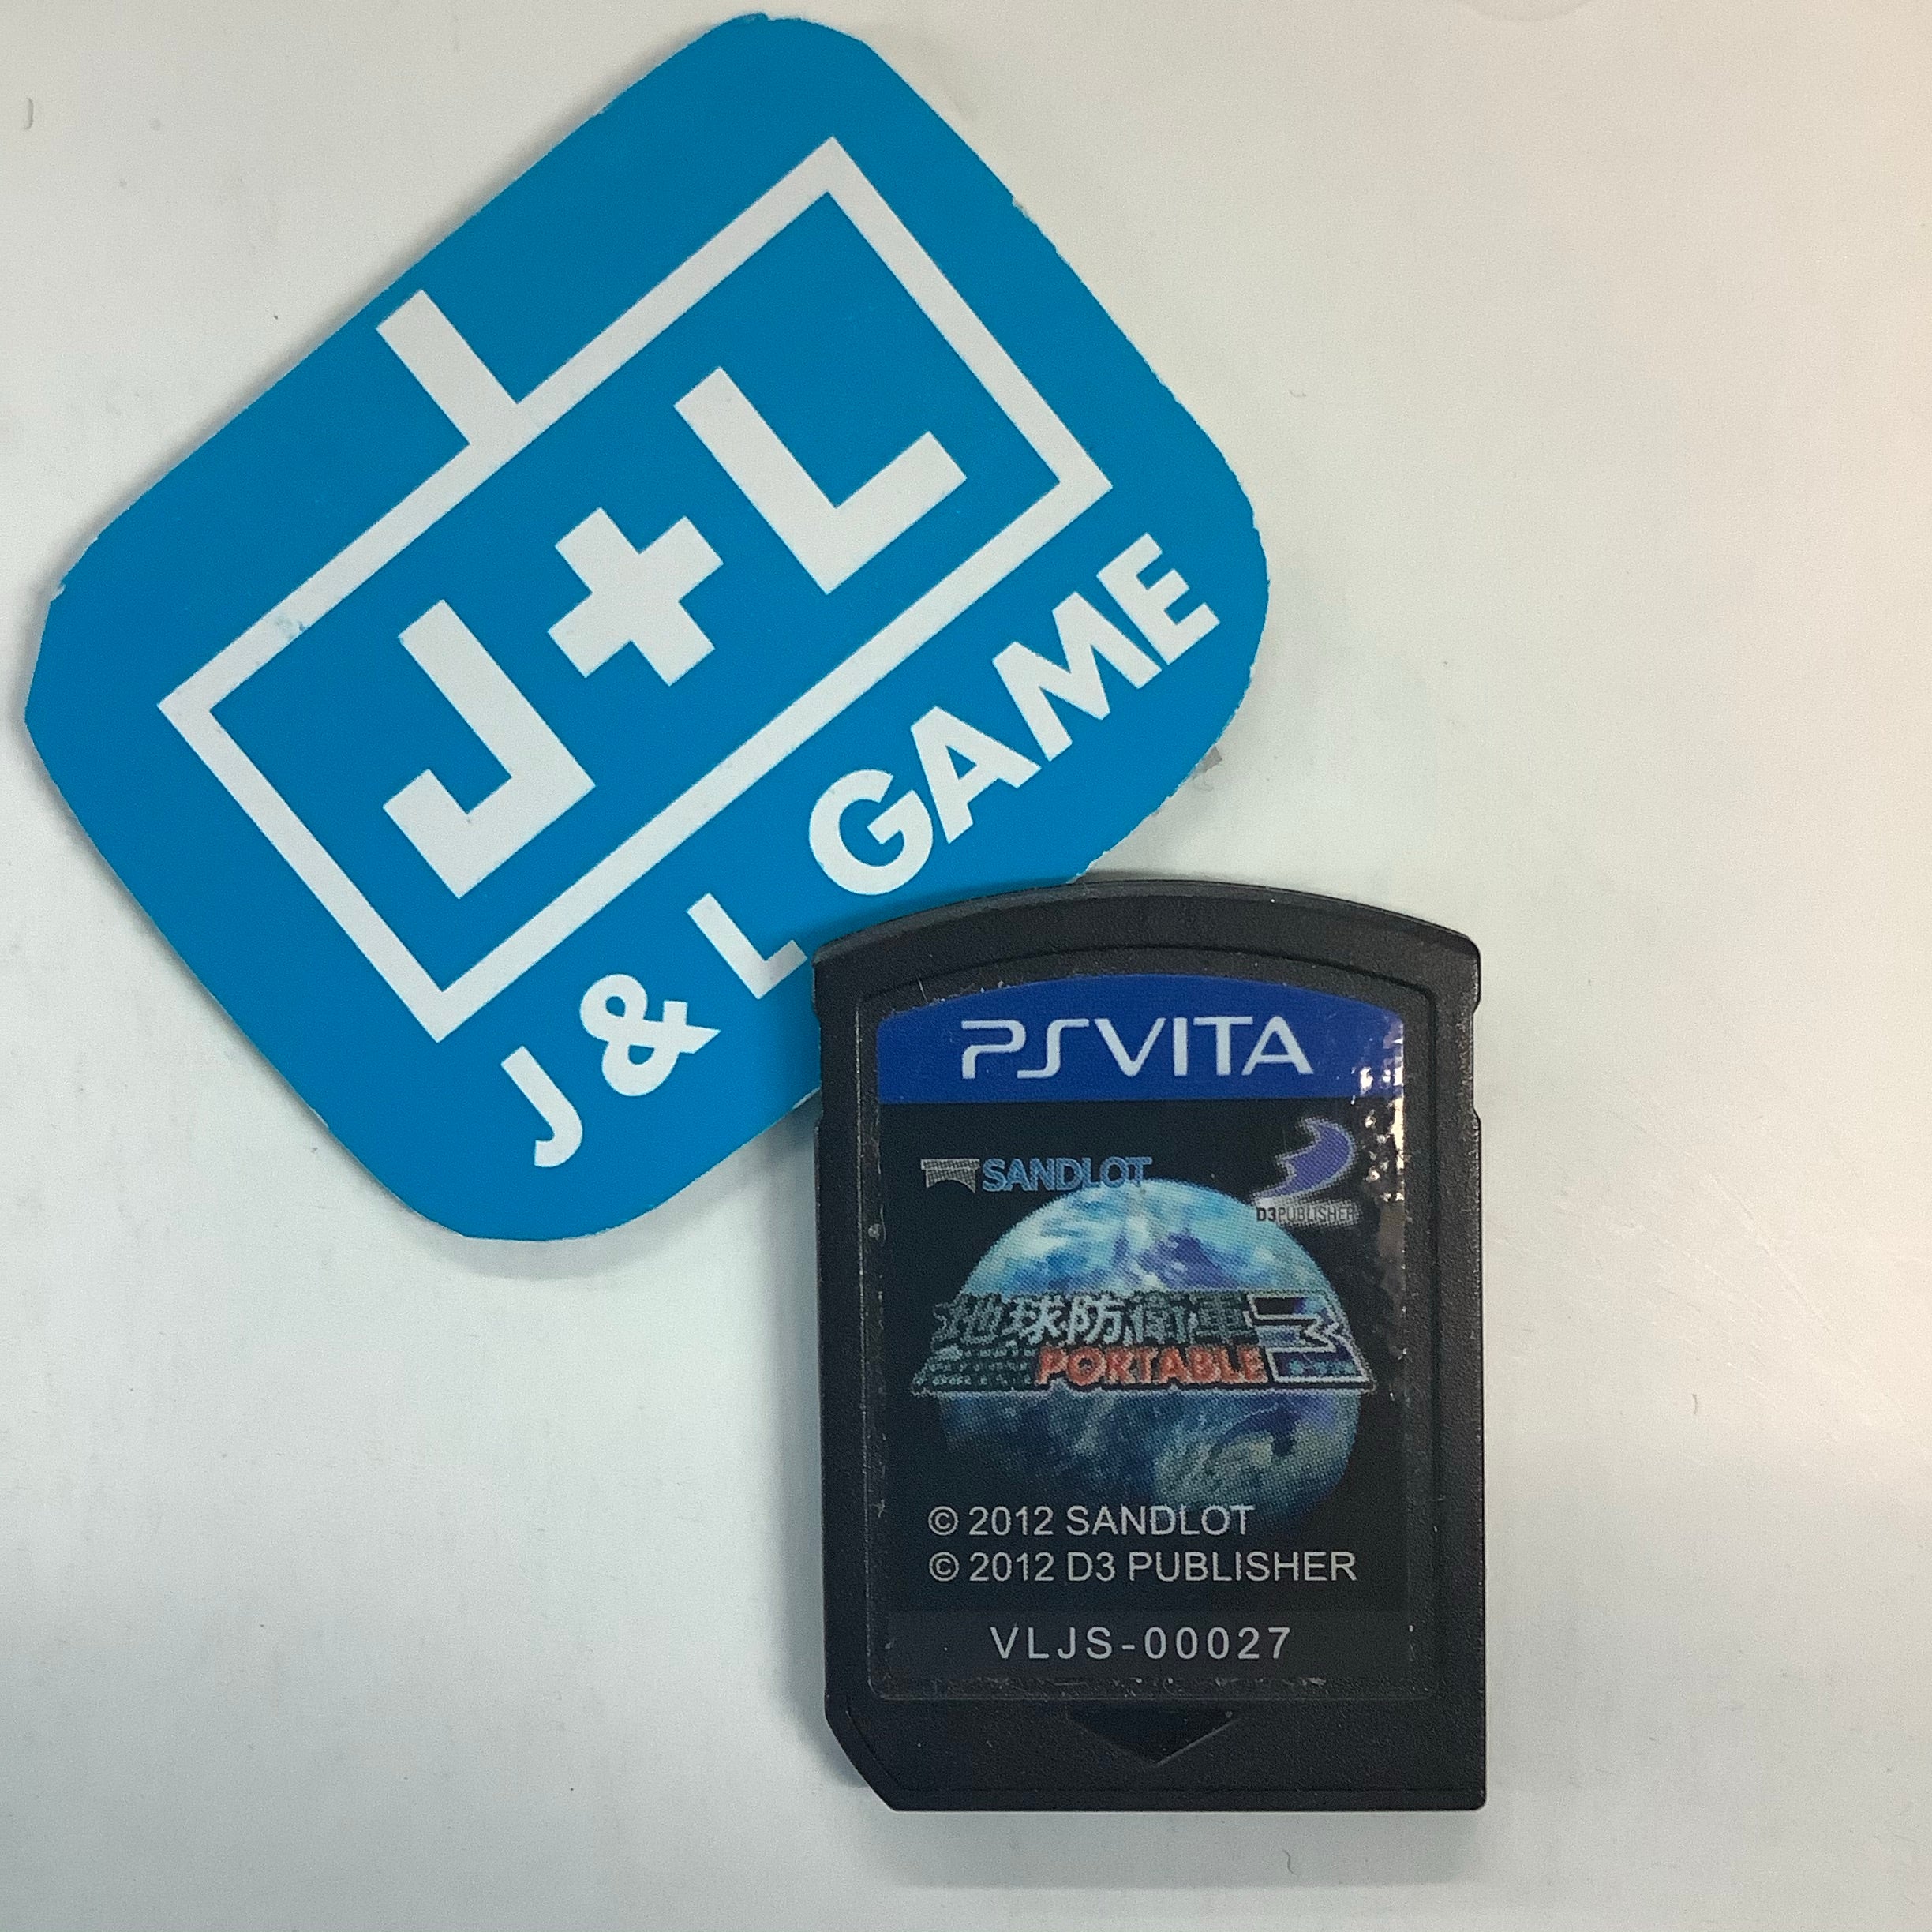 Earth Defense Forces 3 Portable - (PSV) PlayStation Vita [Pre-Owned] (Japanese Import) Video Games D3 Publisher   